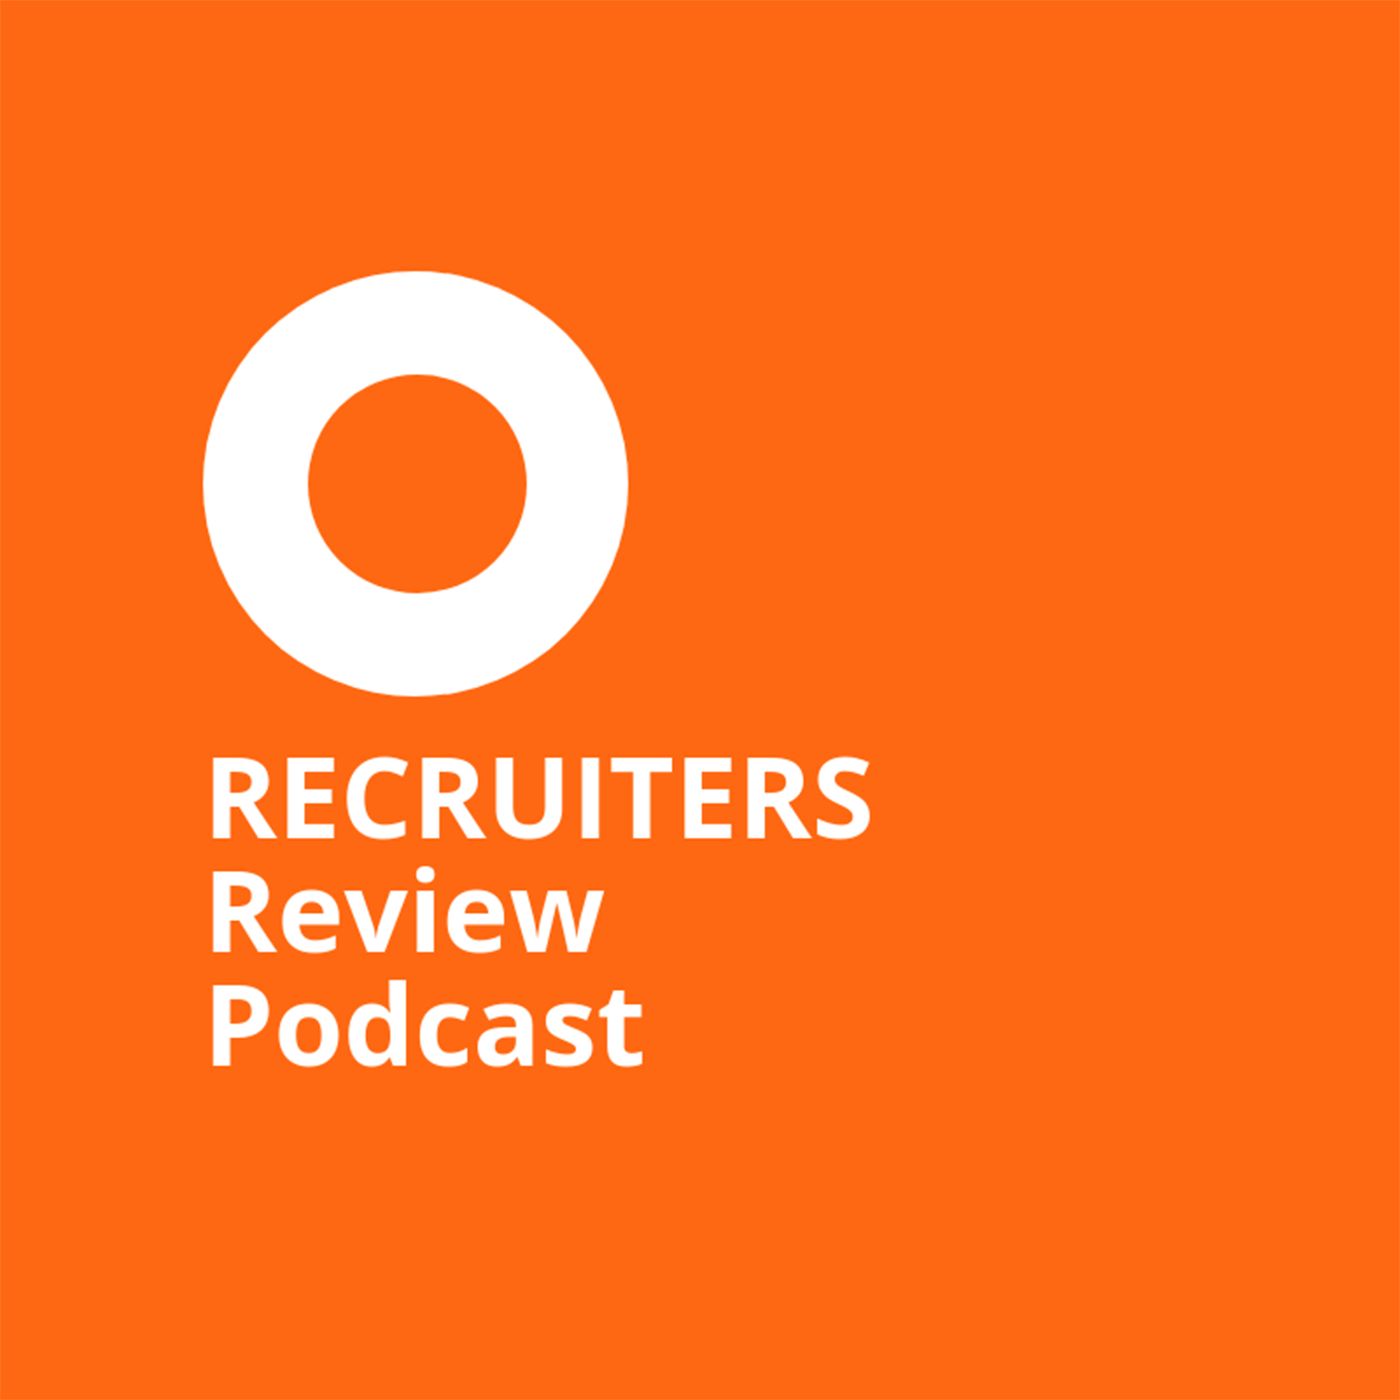 RECRUITERS Review